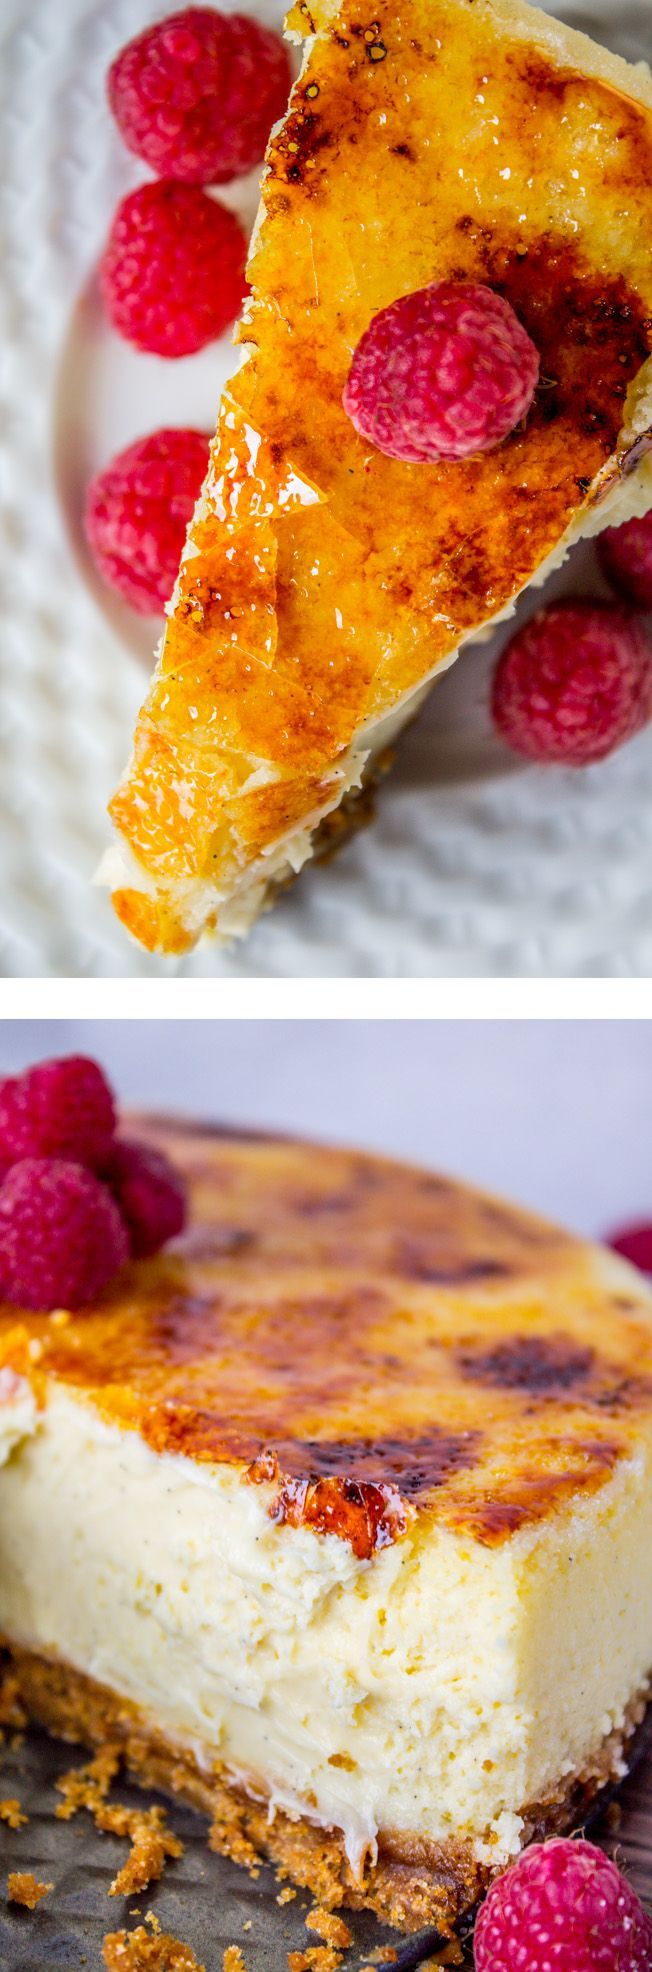 Crème Brûlée Cheesecake recipe from The Food Charlatan // Two of the best…